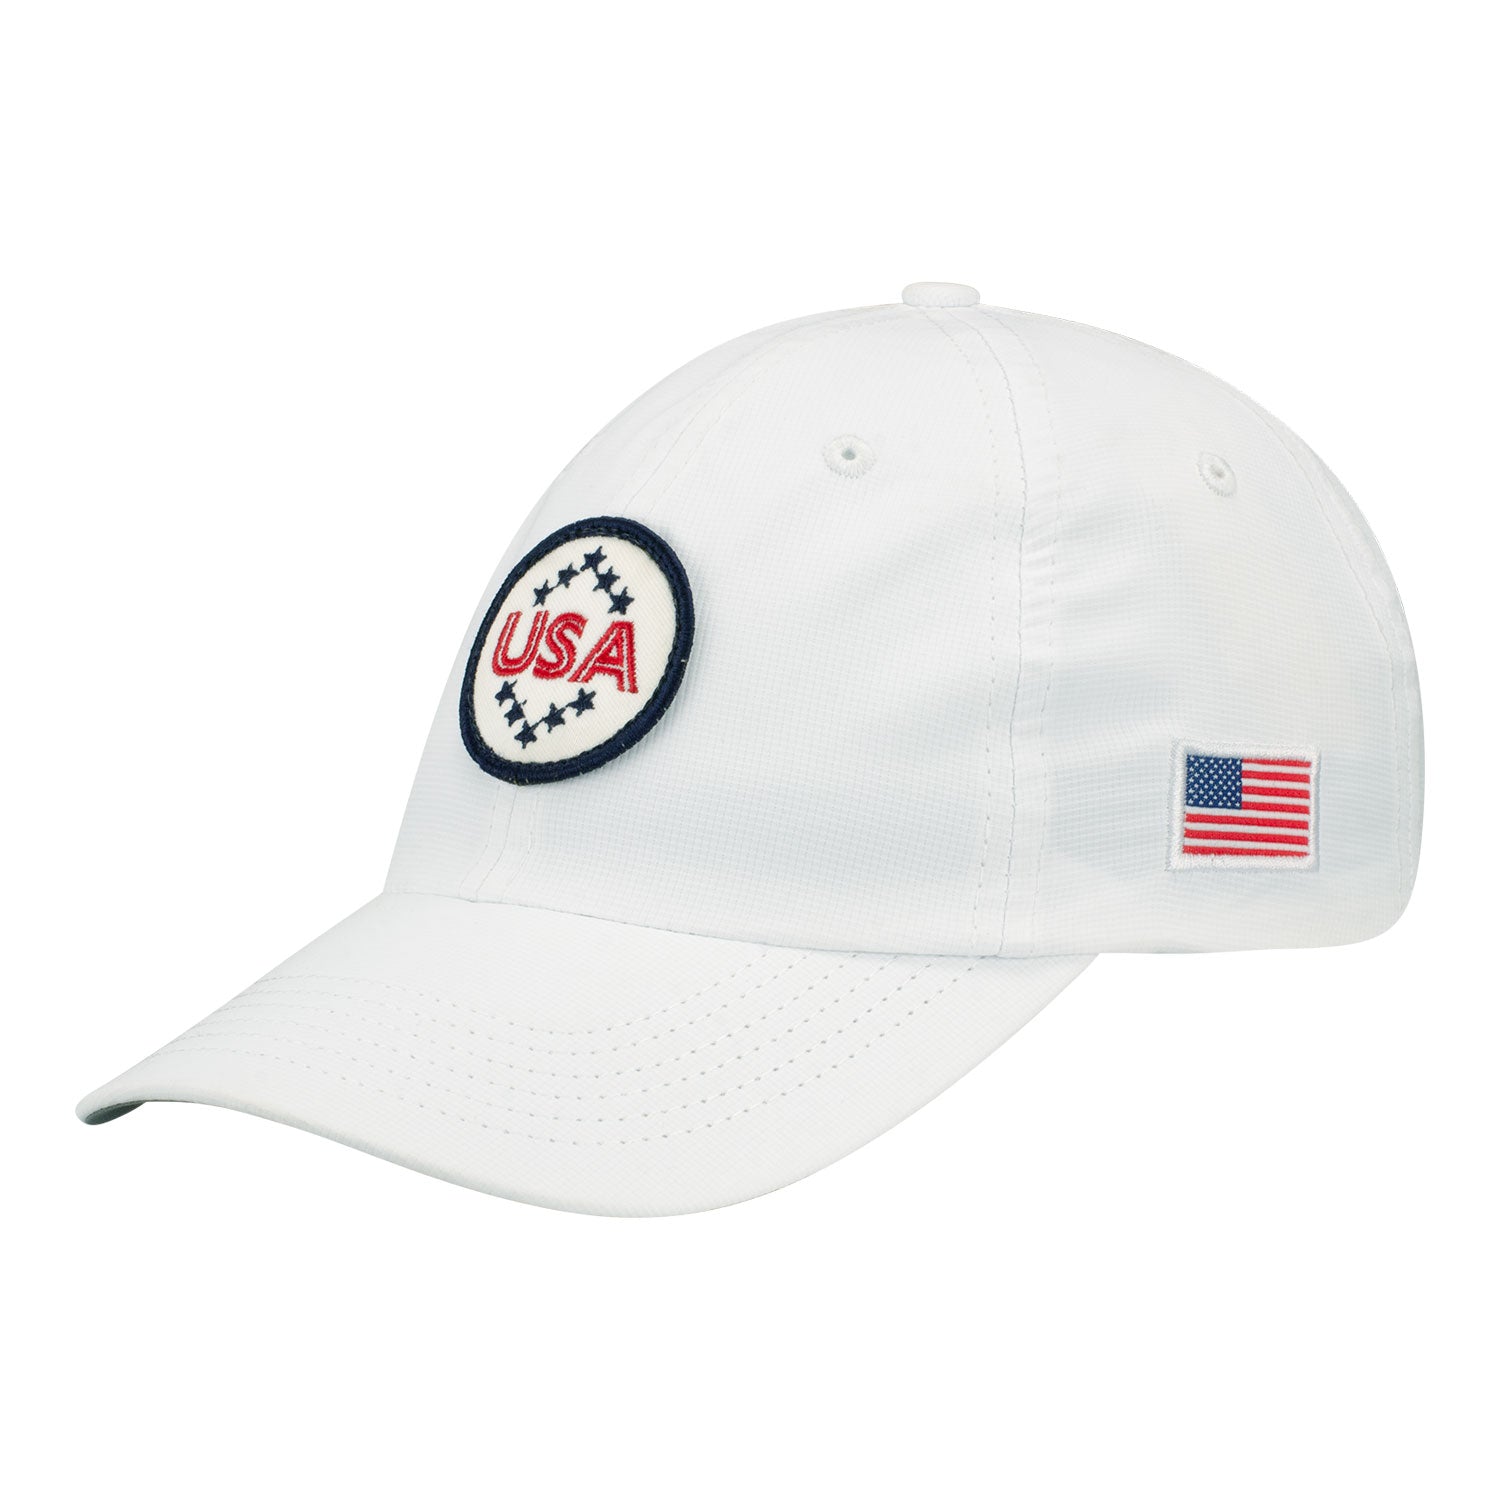 Imperial 2023 LPGA Official Solheim Cup Team Hat in White - Angled Left Side View